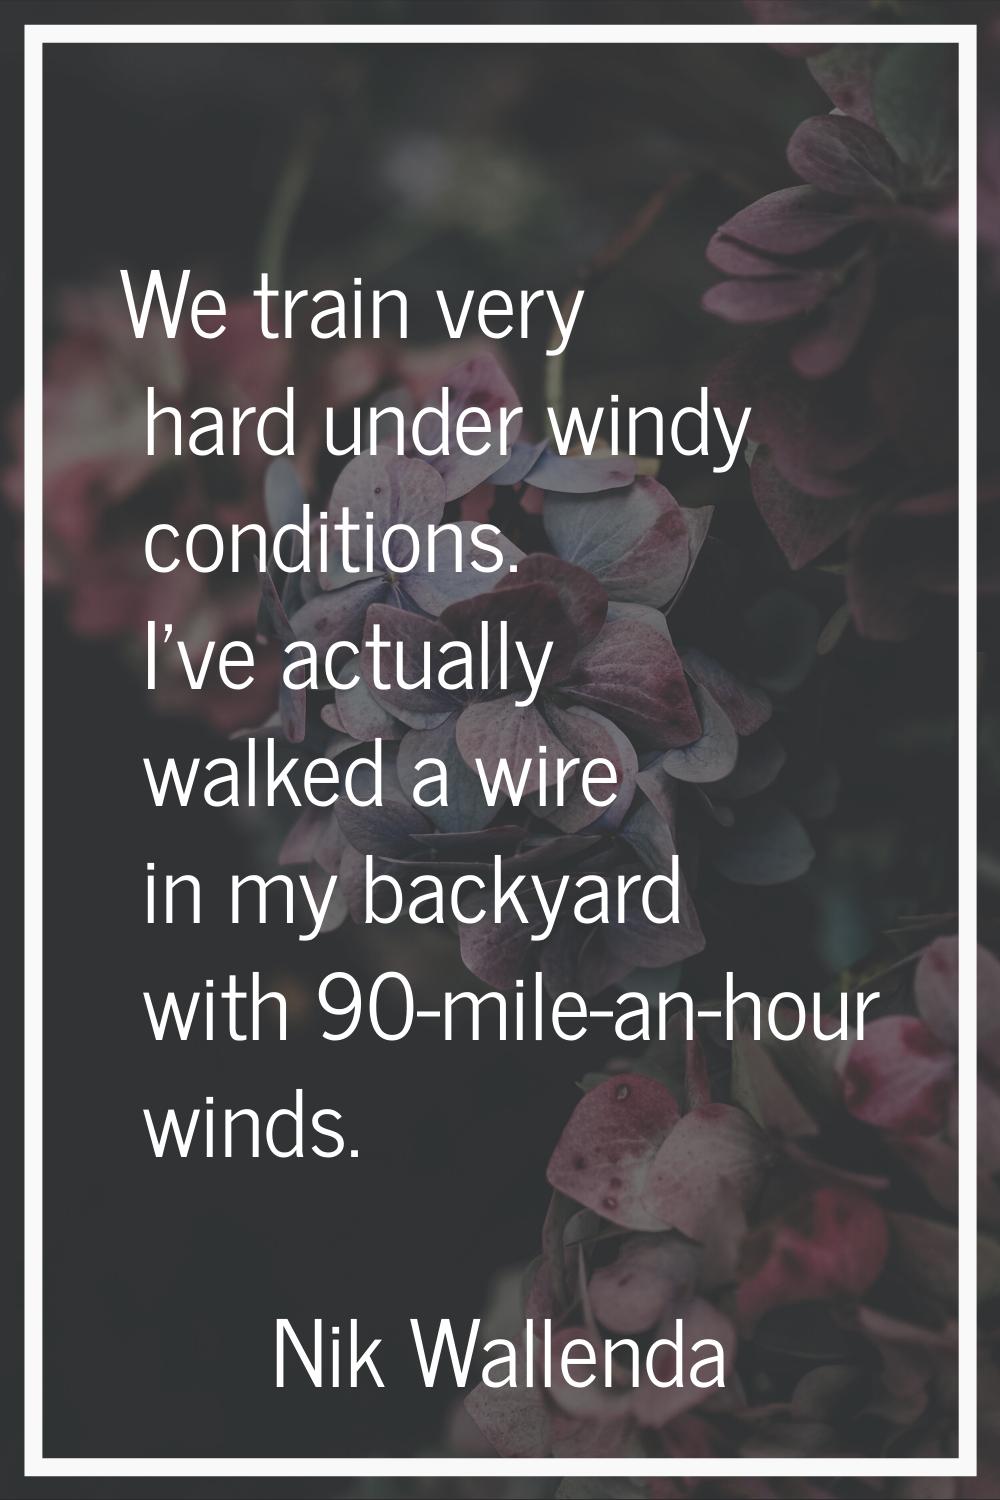 We train very hard under windy conditions. I've actually walked a wire in my backyard with 90-mile-